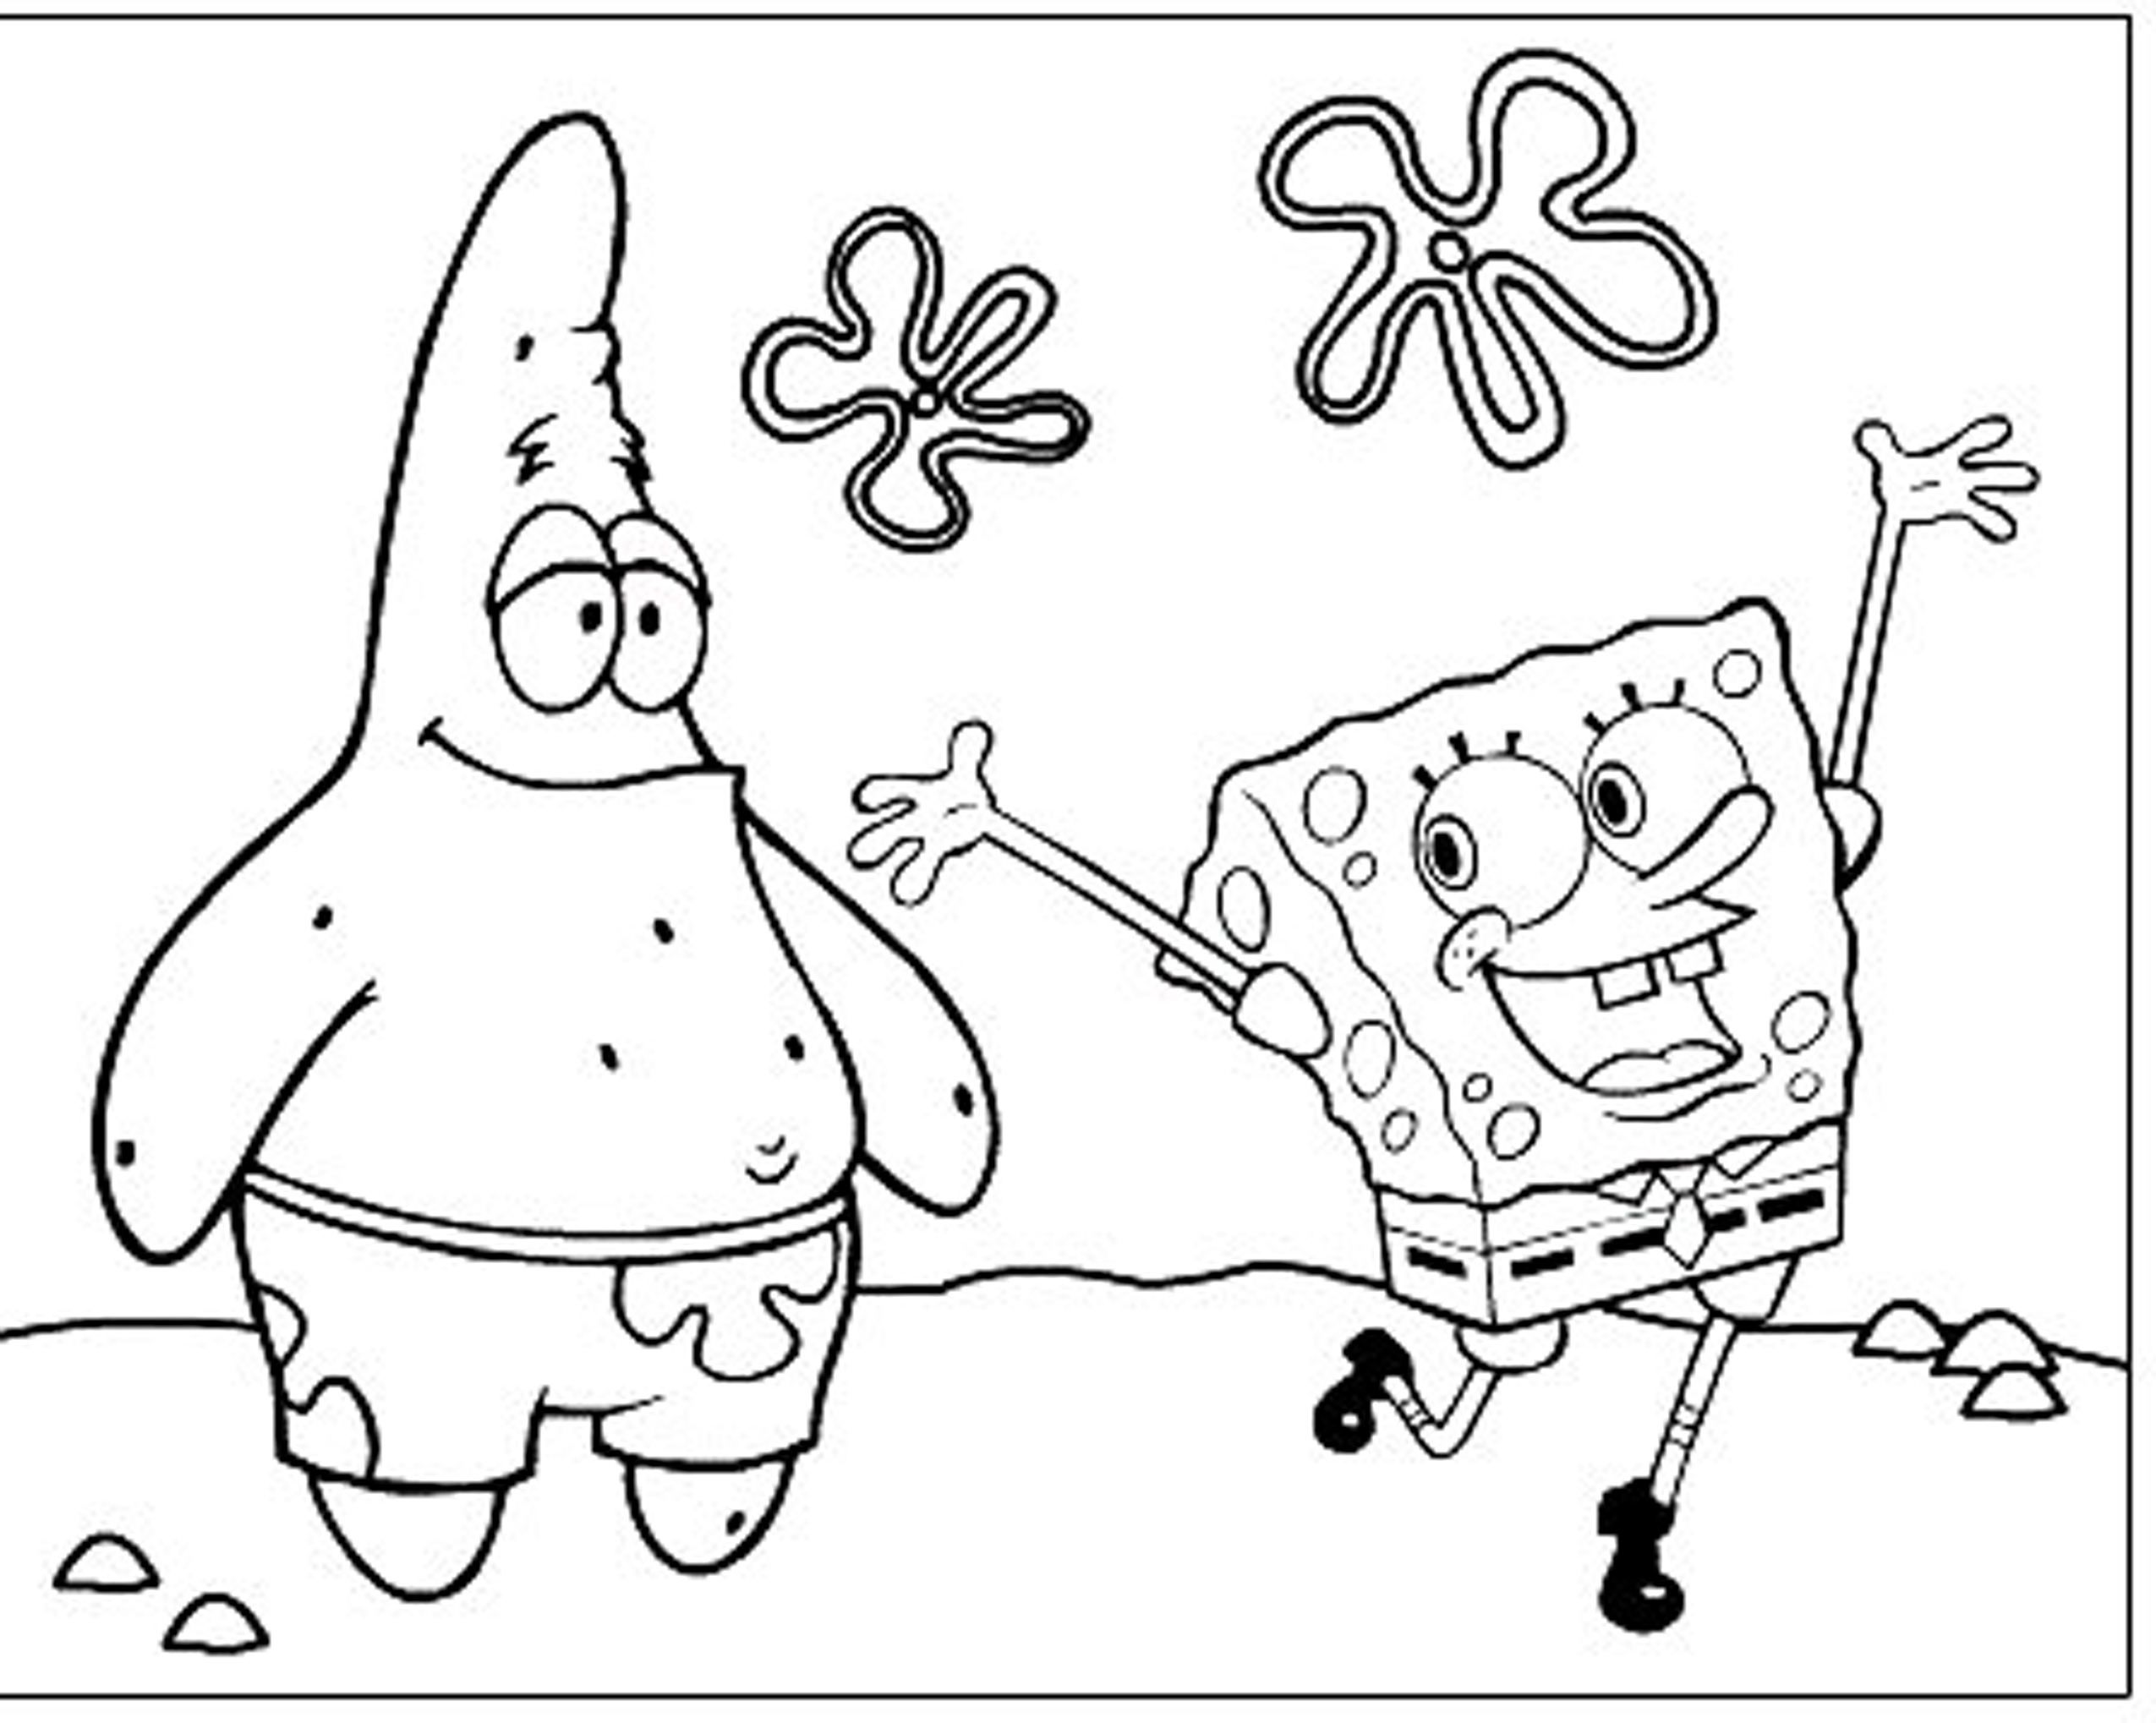 spongebob coloring pages | Coloring Pages for Kids